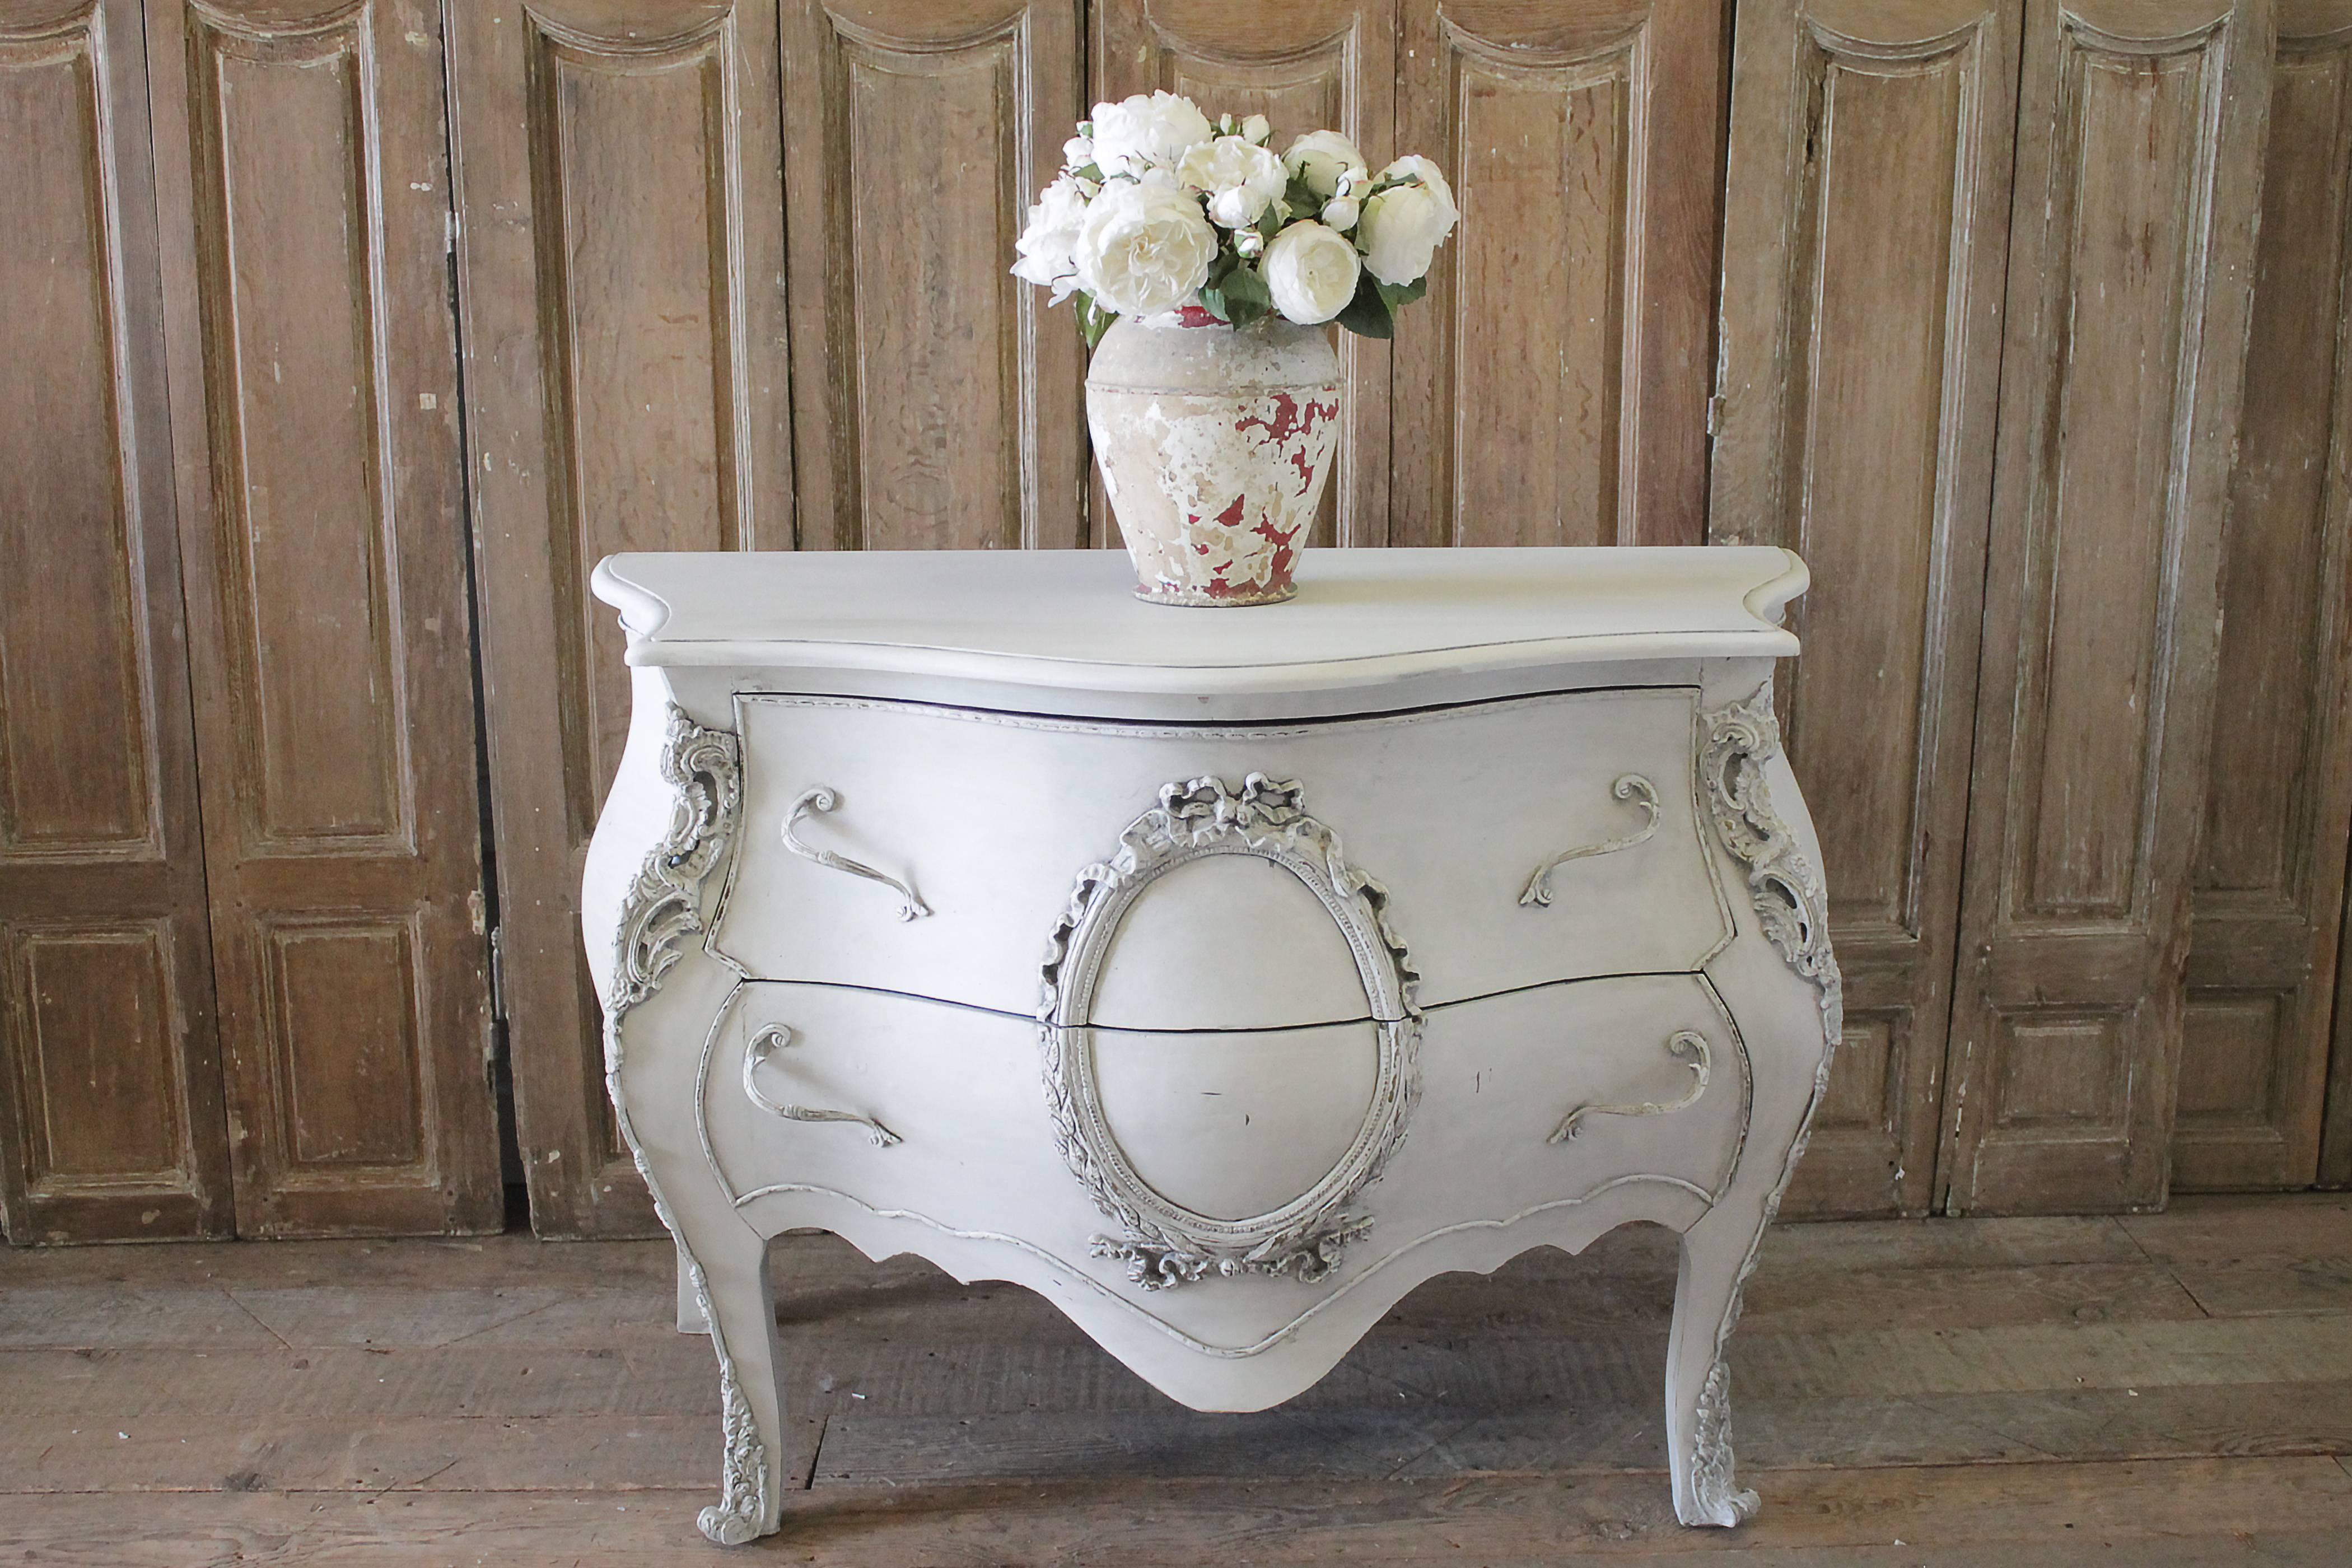 20th century carved and painted Louis XV style bombe commode
Painted in our oyster white finish, with subtle distressed edges, and antique glazed patina. The 2 drawers are finish with a dovetail construction, and original hardware. The ornaments